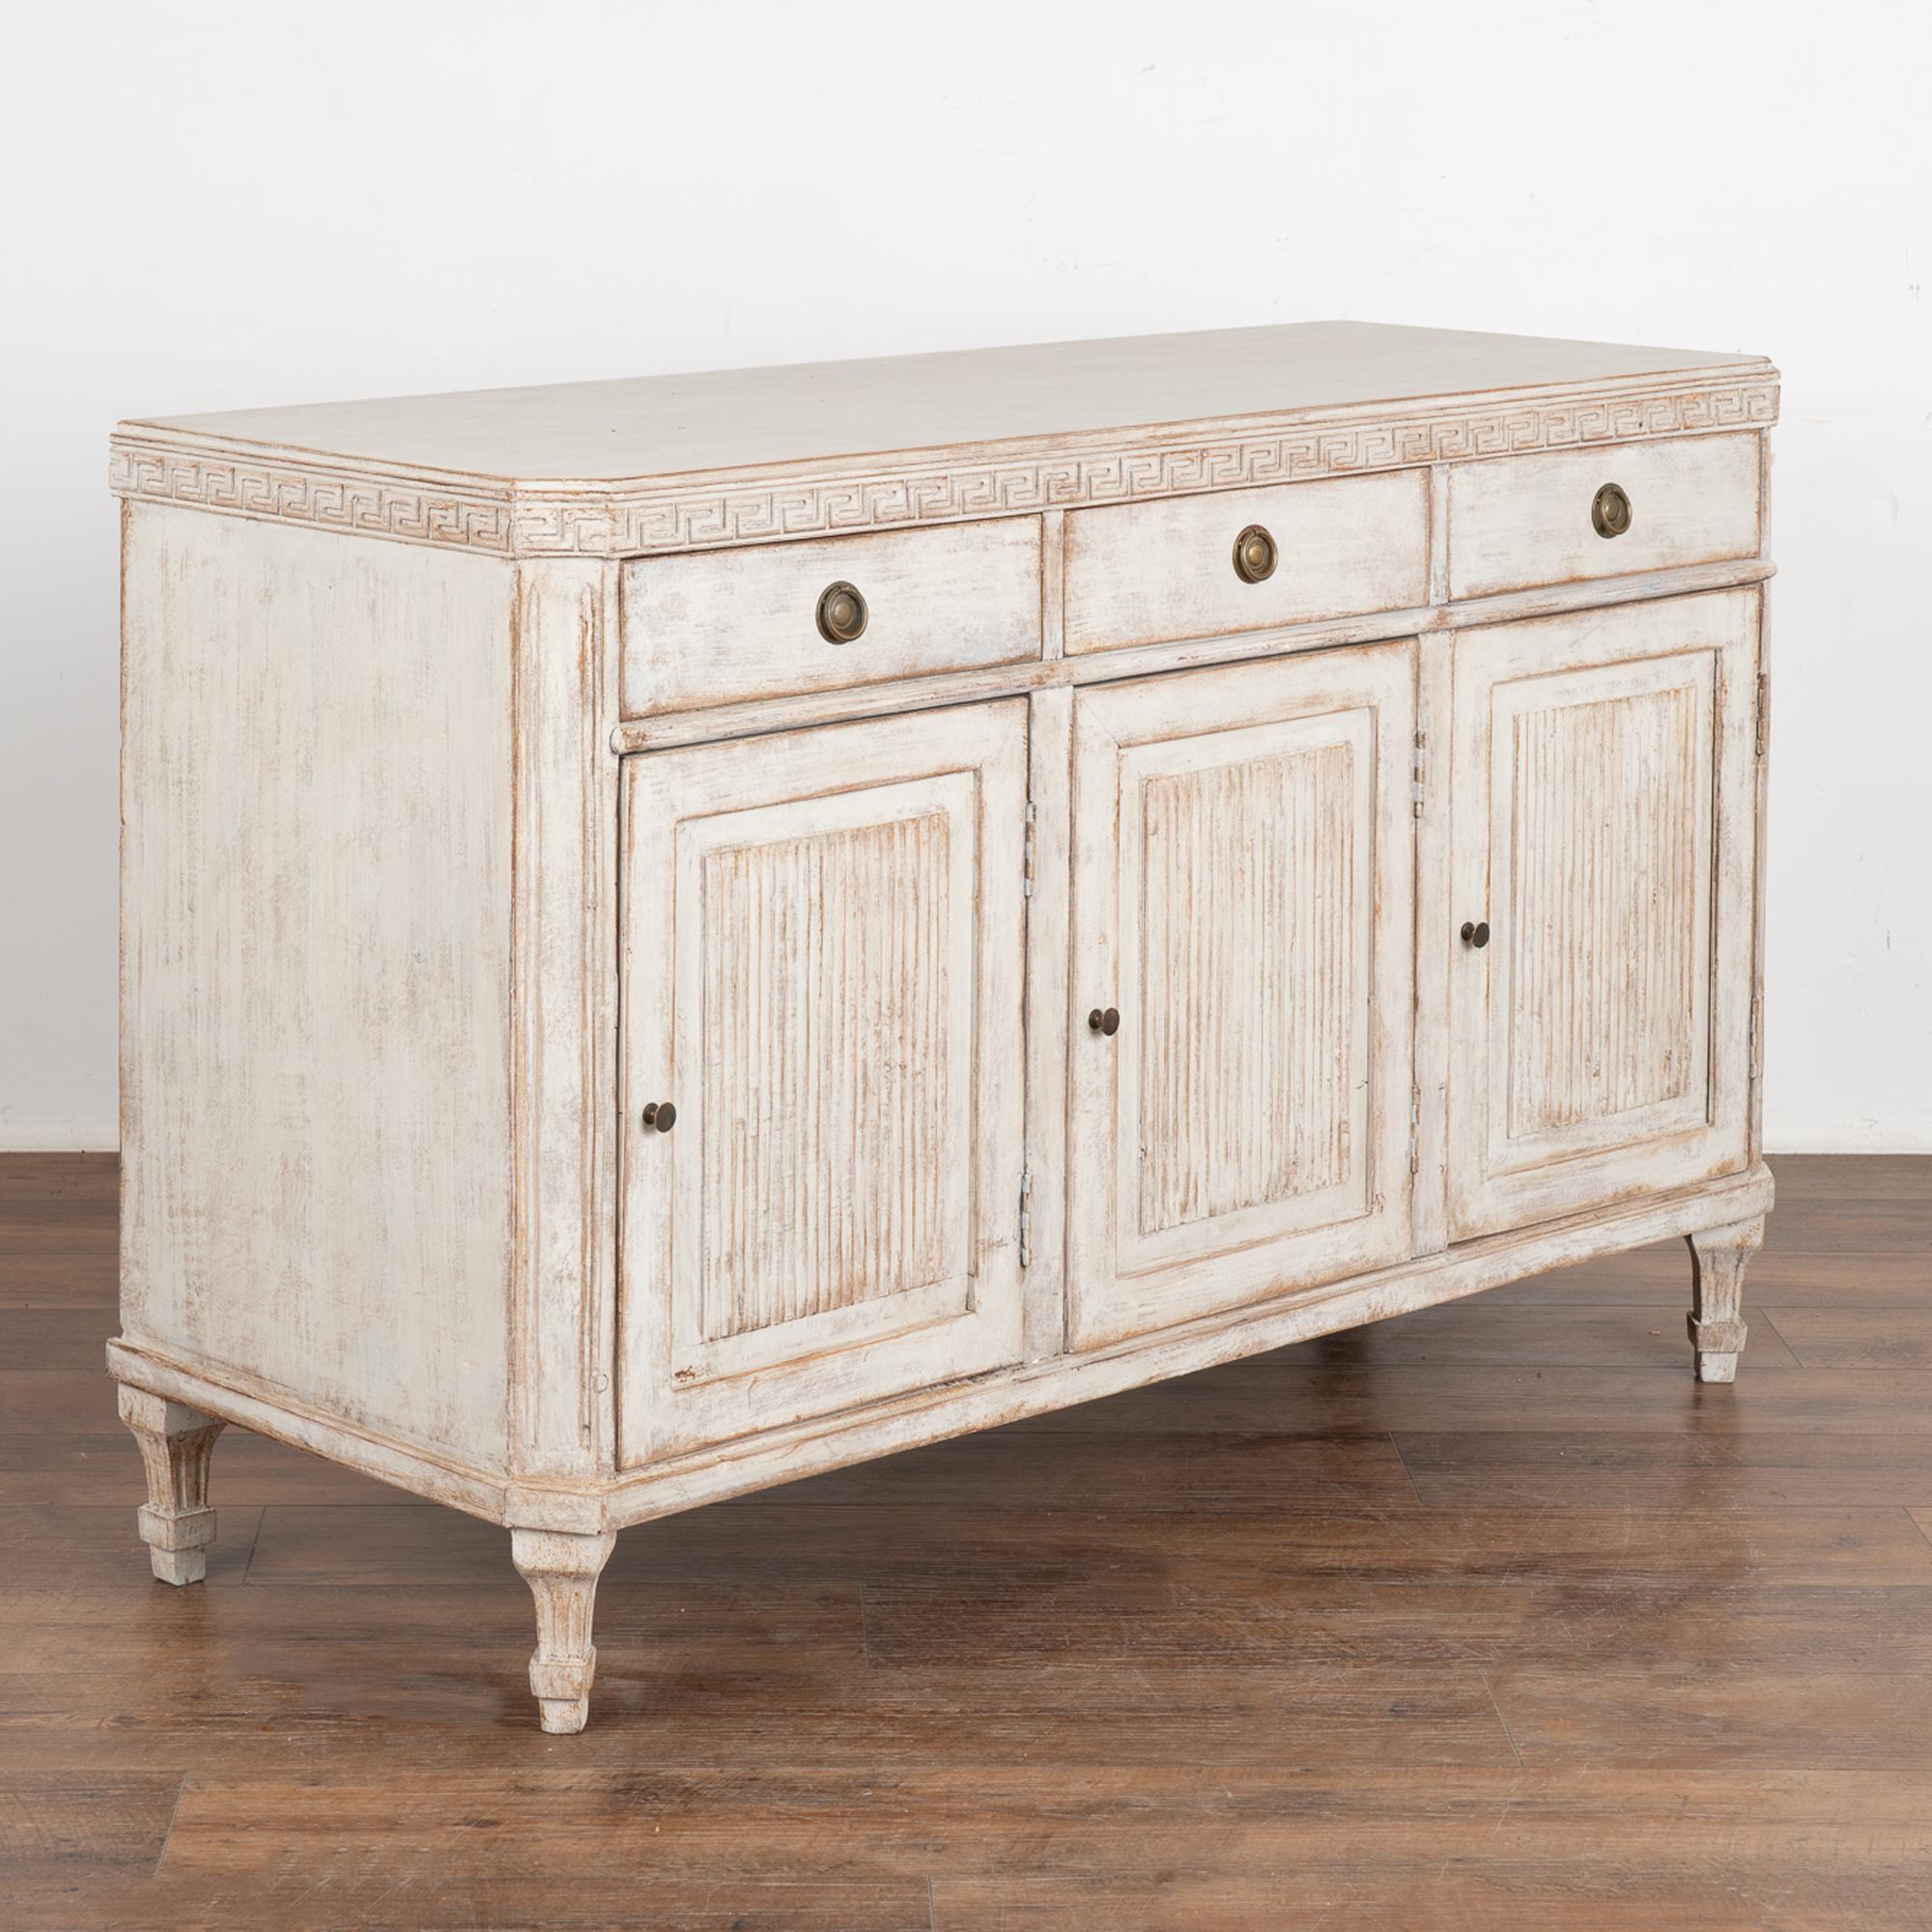 Gustavian white painted pine sideboard or console with one interior shelf (see photos to understand cut-out shape of shelf).
Traditional fluted panel doors, Greek key or 